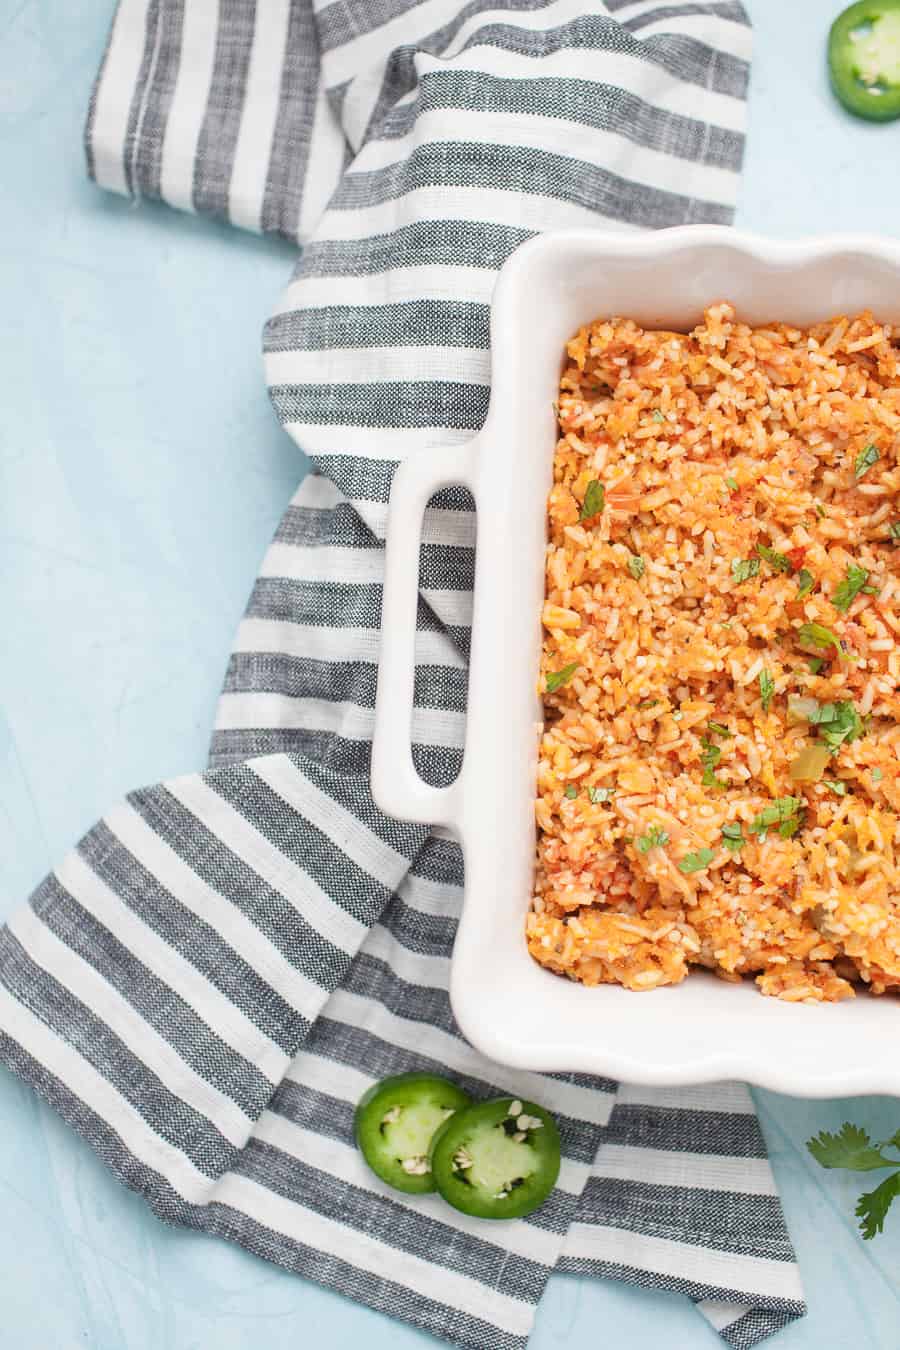 If you love Mexican food but want that restaurant quality food at home, this Traditional Mexican Rice is for you! This recipe is easy to make and bakes in the oven, which locks in the flavor and moisture that makes this recipe so delicious. You'll never go back to eating Mexican rice any other way!?